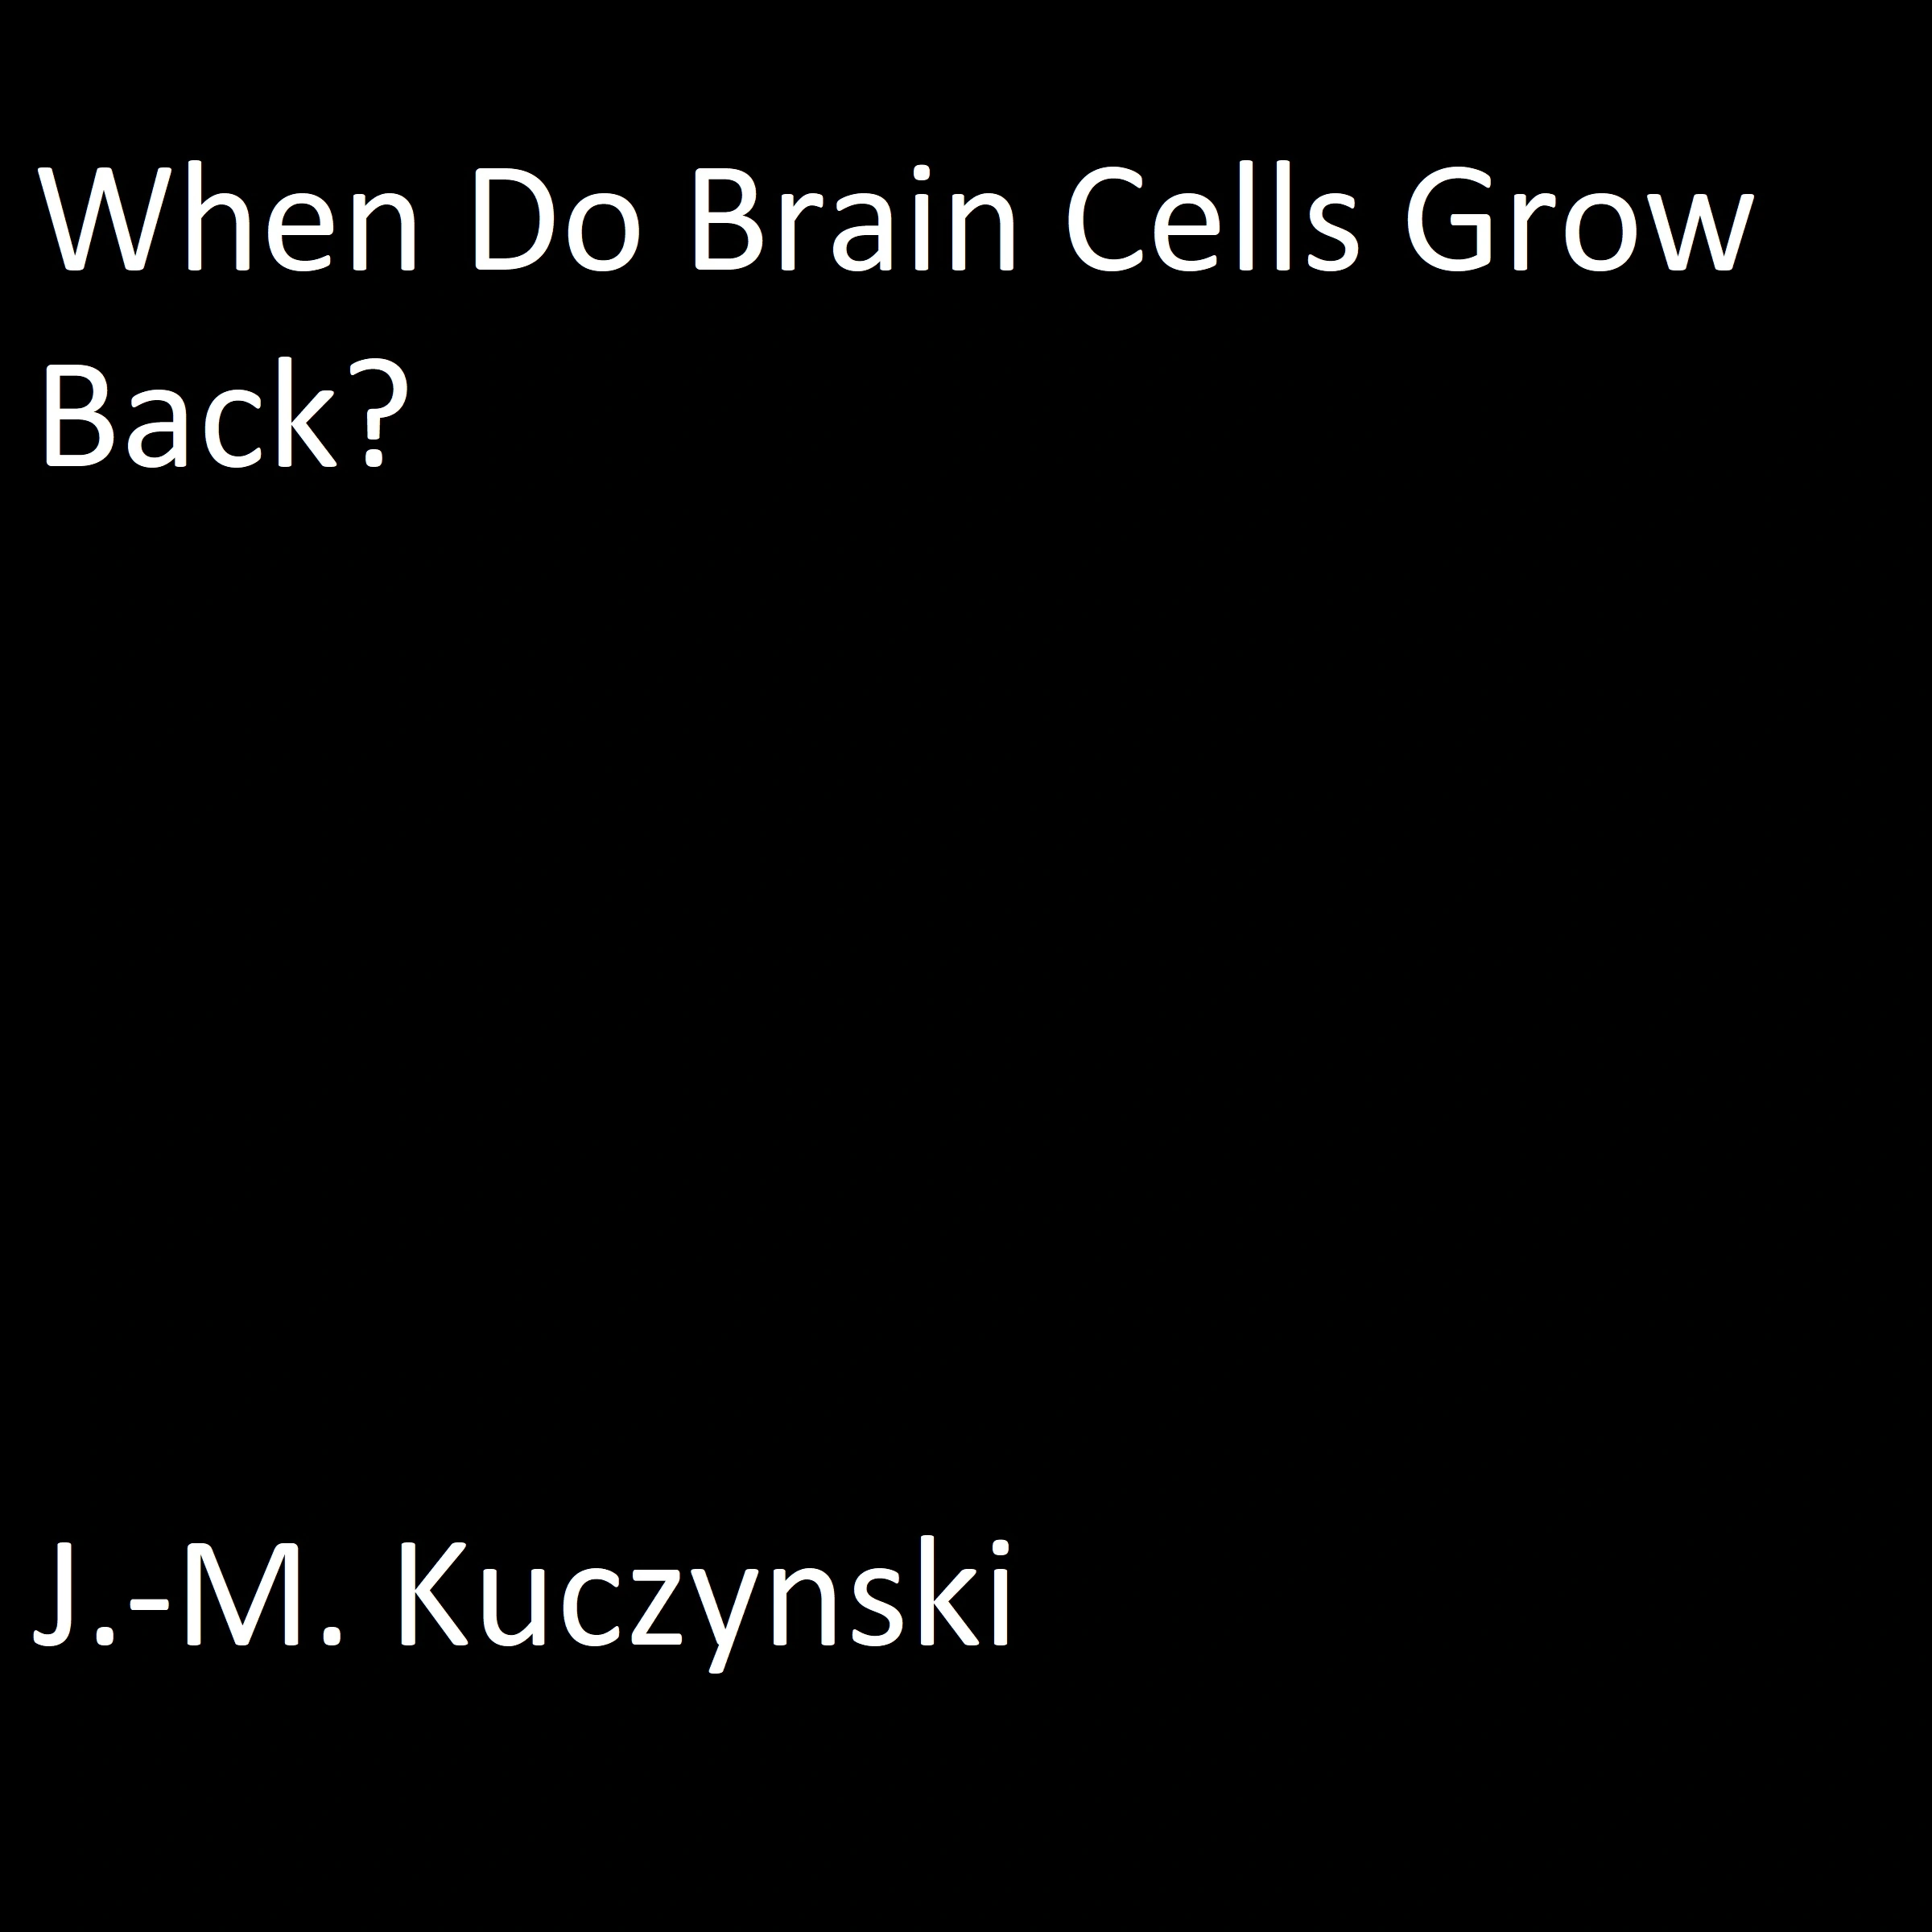 When do Brain Cells Grow Back: A Conjecture Audiobook by J.-M. Kuczynski